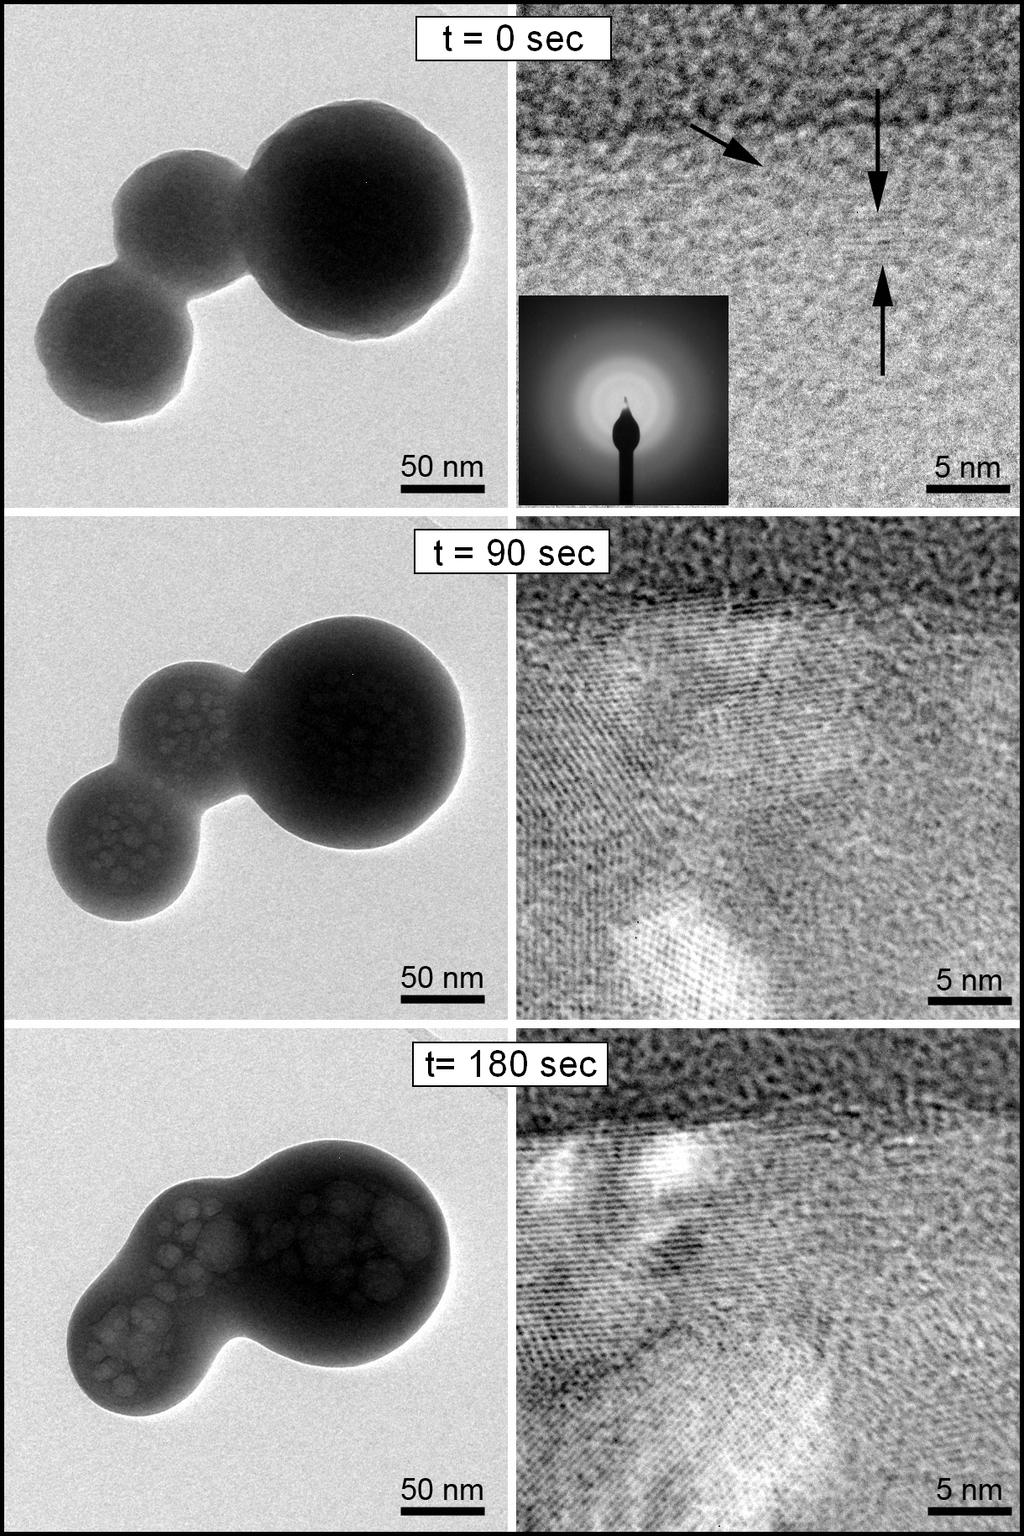 262 Figure 21 Brydson, Brown, Benning, Livi Figure 21. Bright field TEM image time series of the crystallization of amorphous calcium carbonate (ACC) upon exposure to the electron beam.